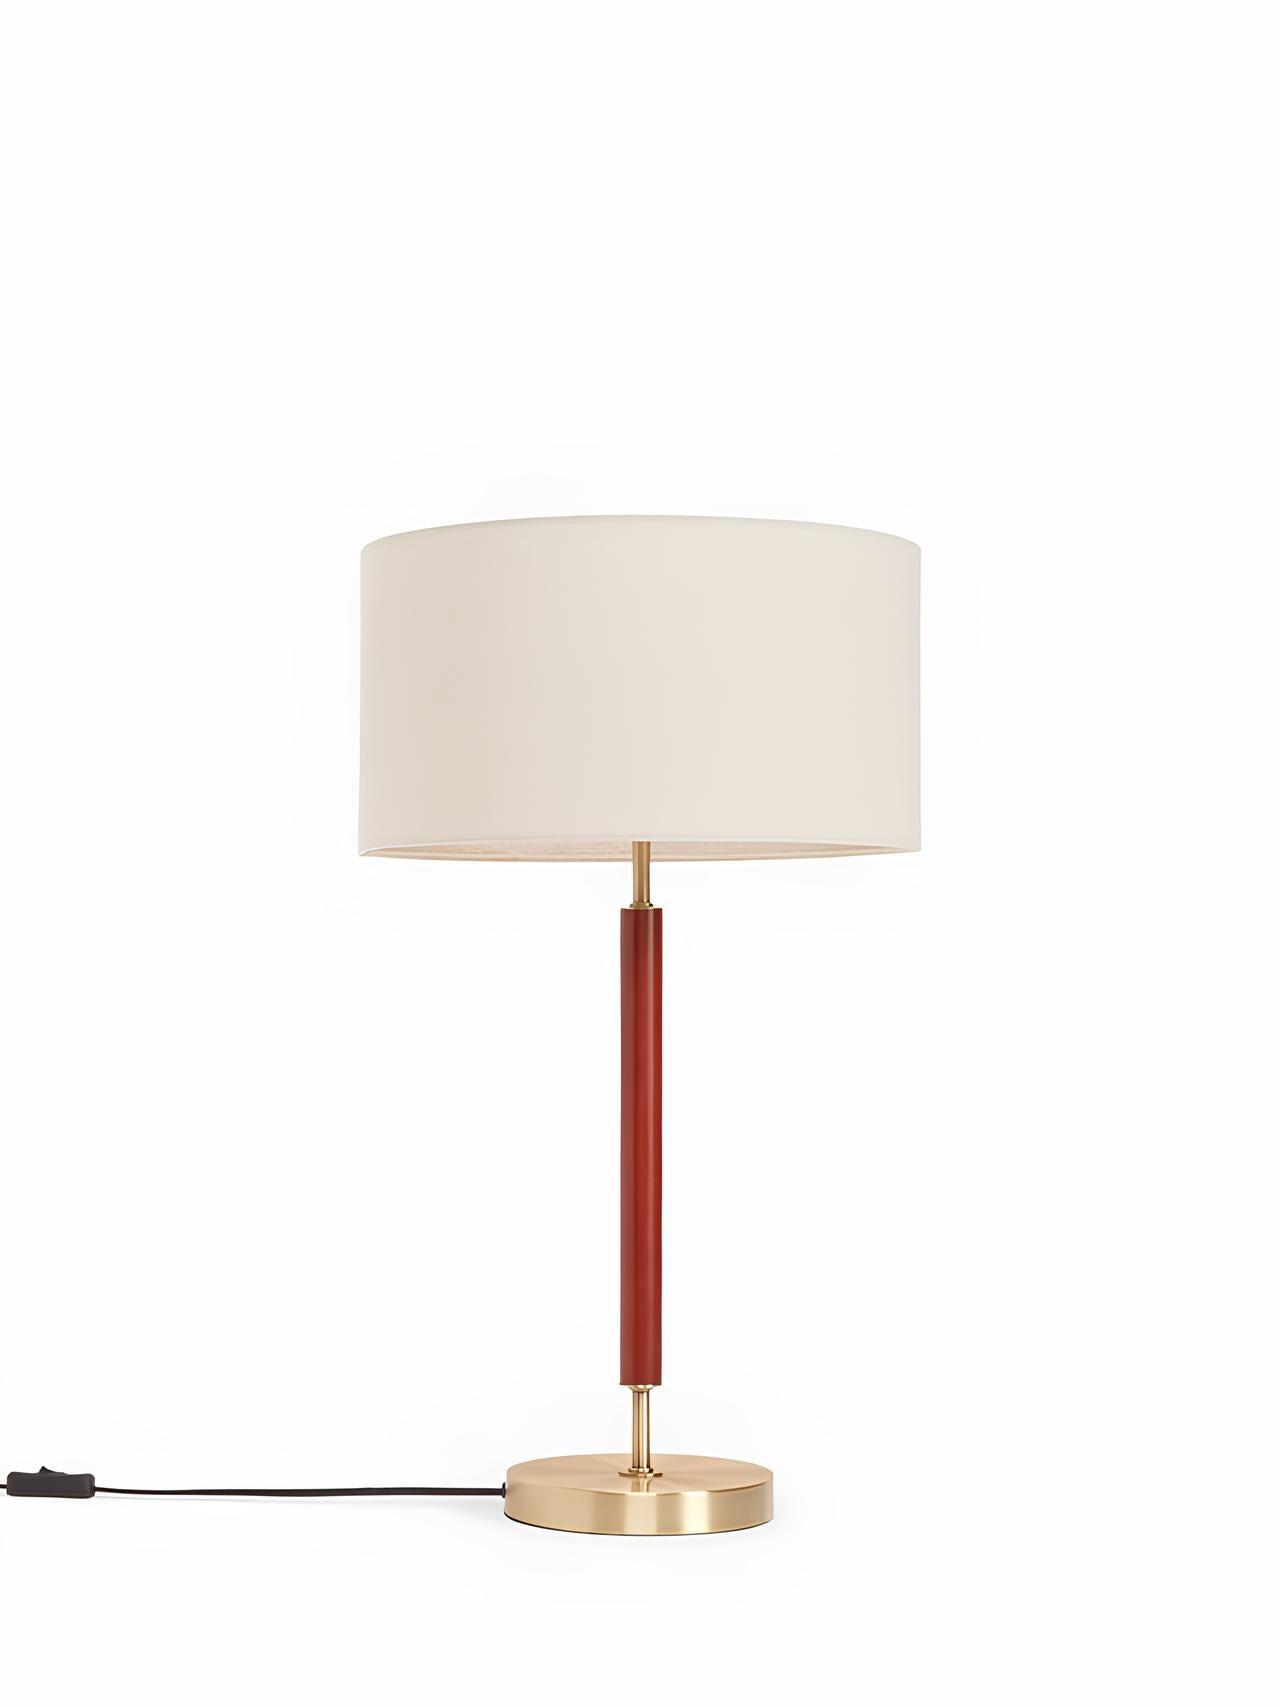 Rattan Table lamp for Living room | Bamboo Bedside table lamp | Cane Table lamp - Kashvi - Akway